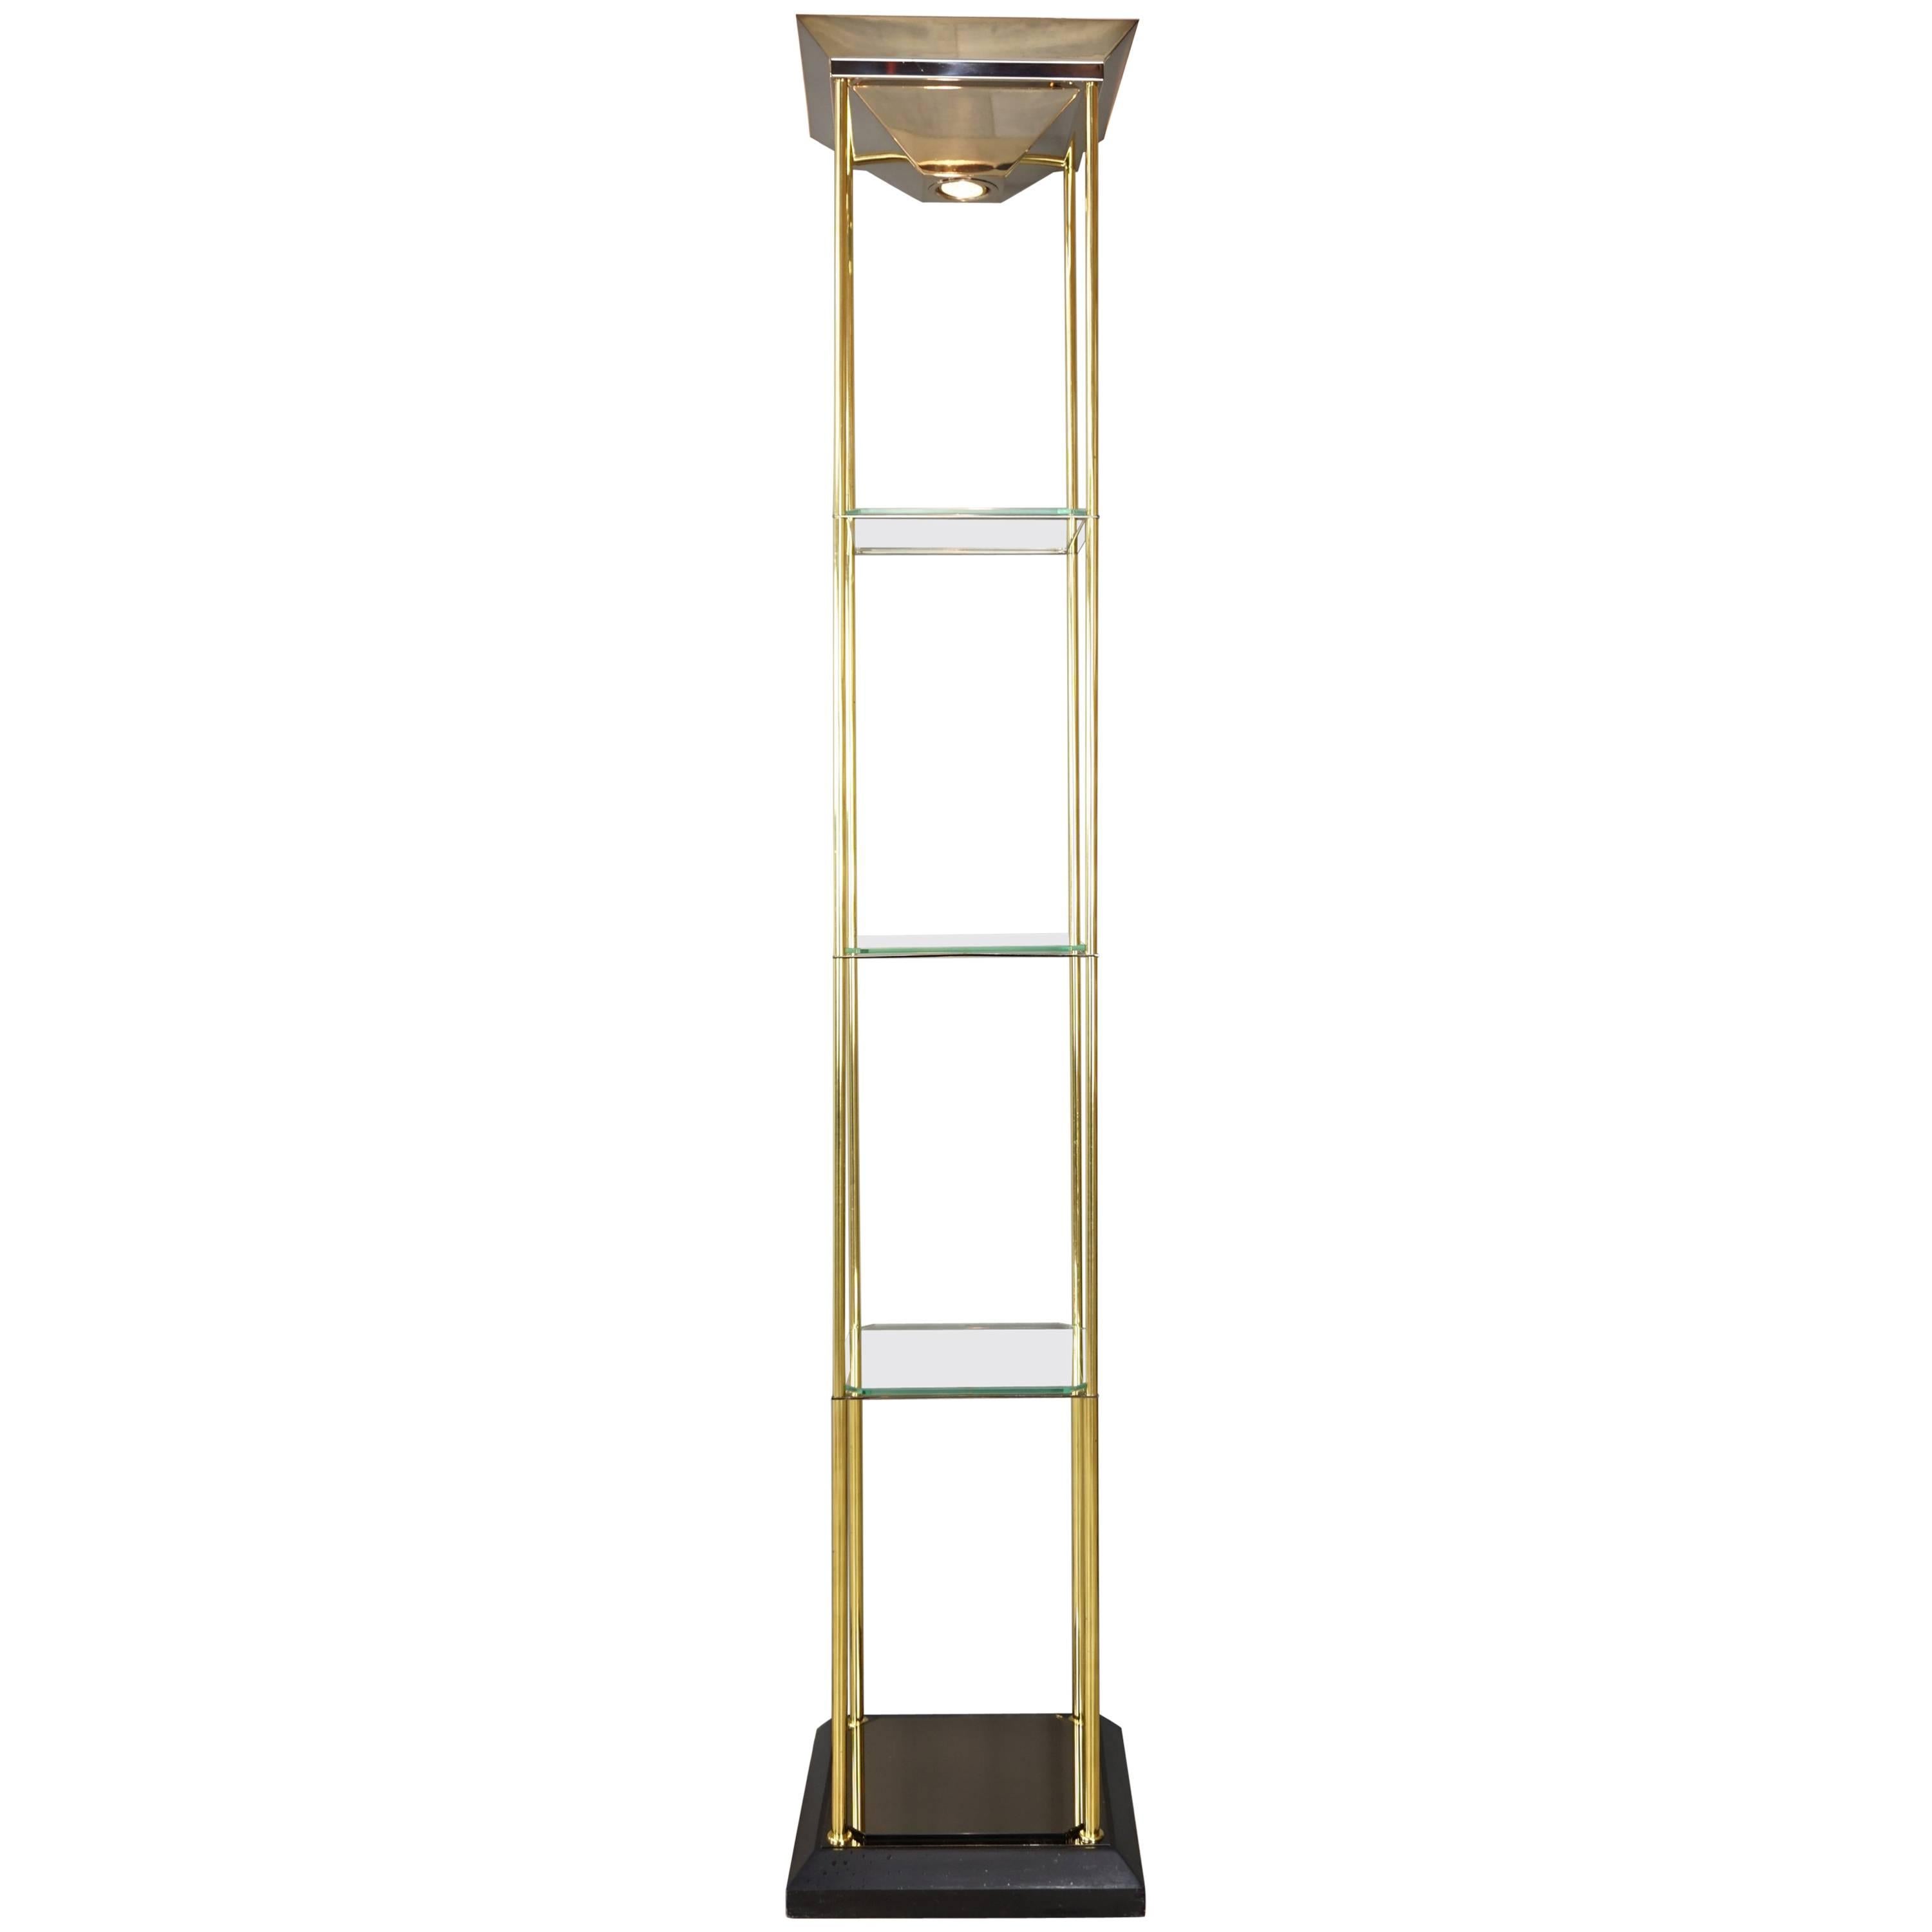 Design Glass Metal and Brass Floor Lamp with Shelves